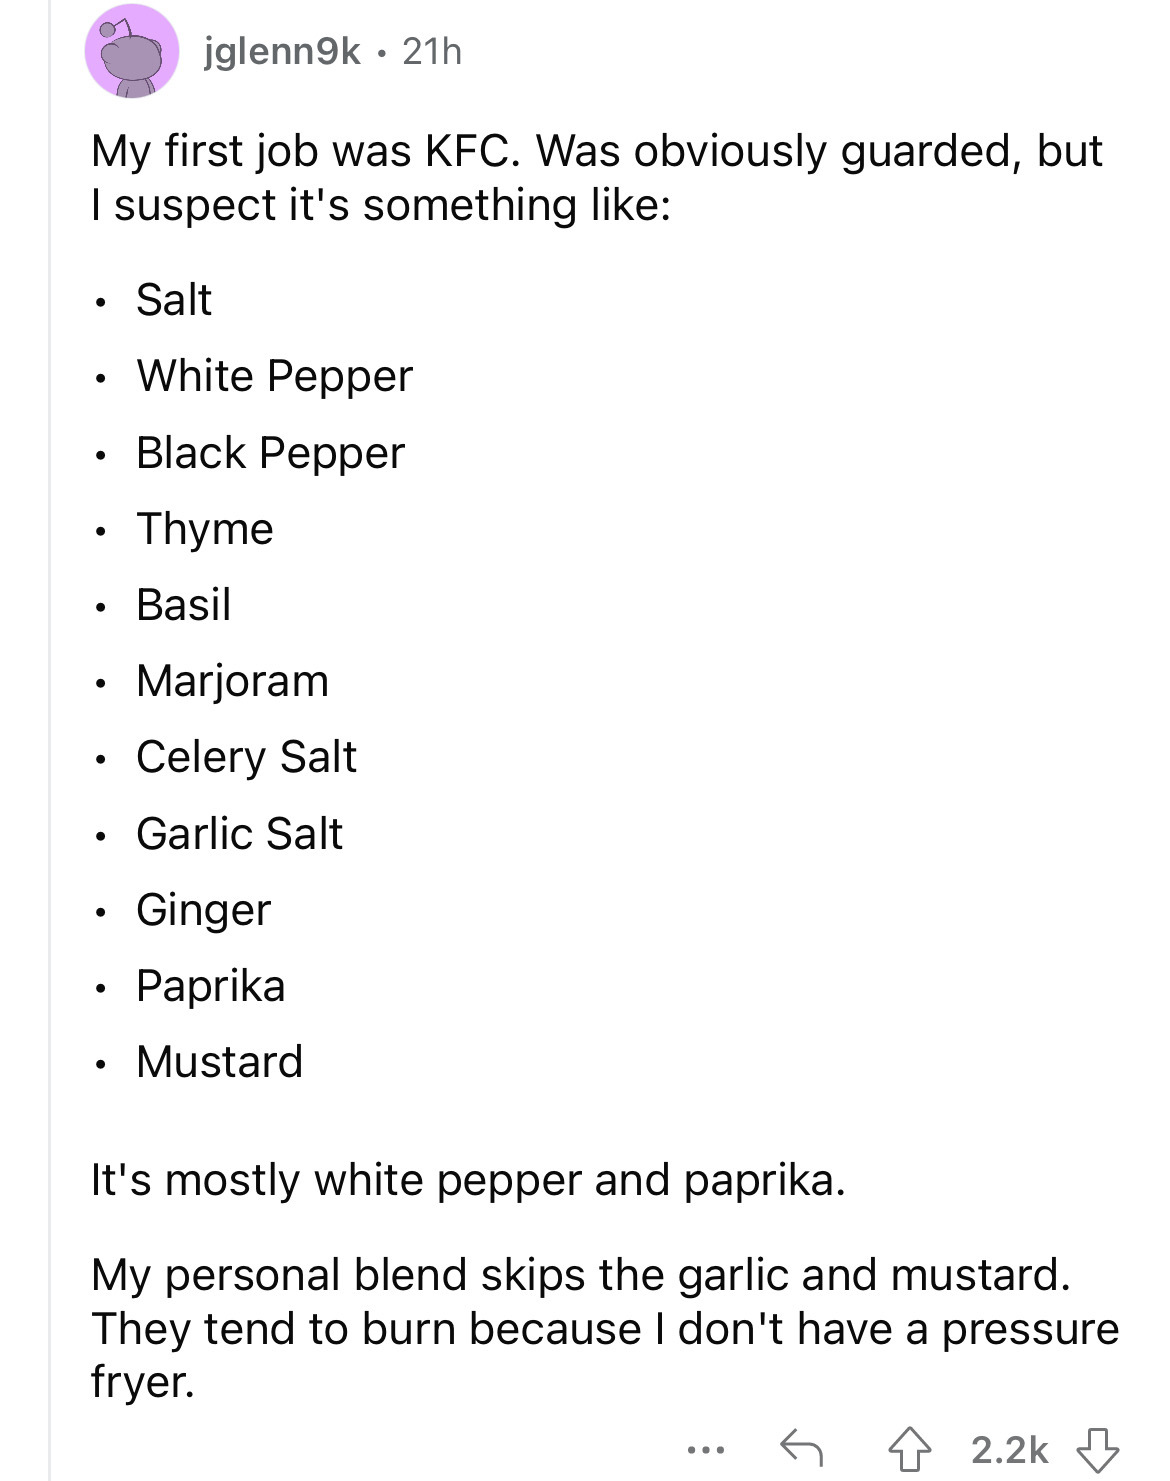 angle - My first job was Kfc. Was obviously guarded, but I suspect it's something jglenn9k 21h Salt White Pepper Black Pepper Thyme Basil Marjoram Celery Salt Garlic Salt Ginger Paprika Mustard It's mostly white pepper and paprika. My personal blend skips